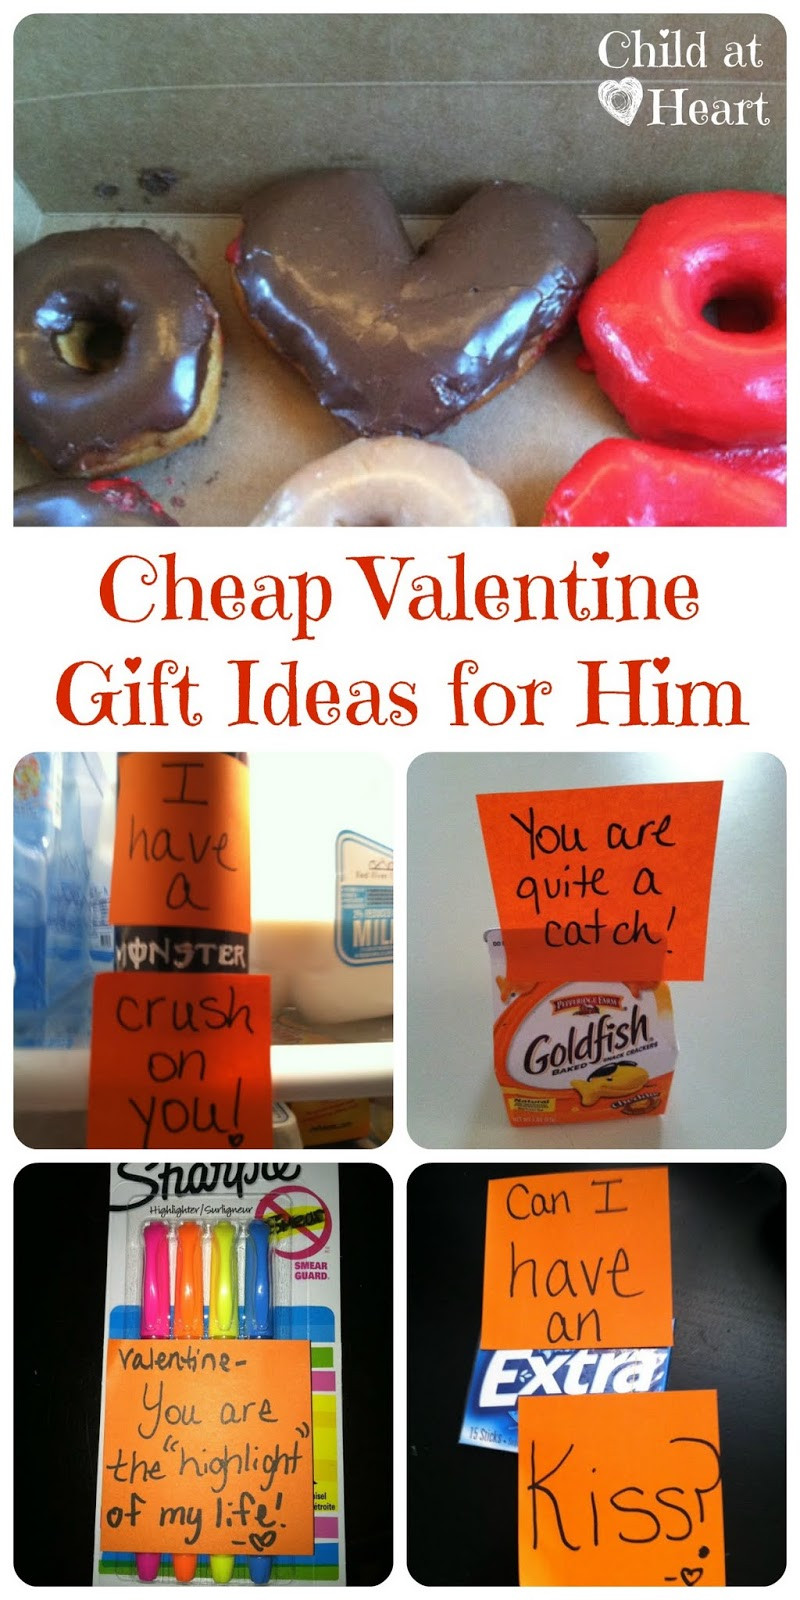 Inexpensive Gift Ideas For Boyfriend
 Cheap Valentine Gift Ideas for Him Child at Heart Blog